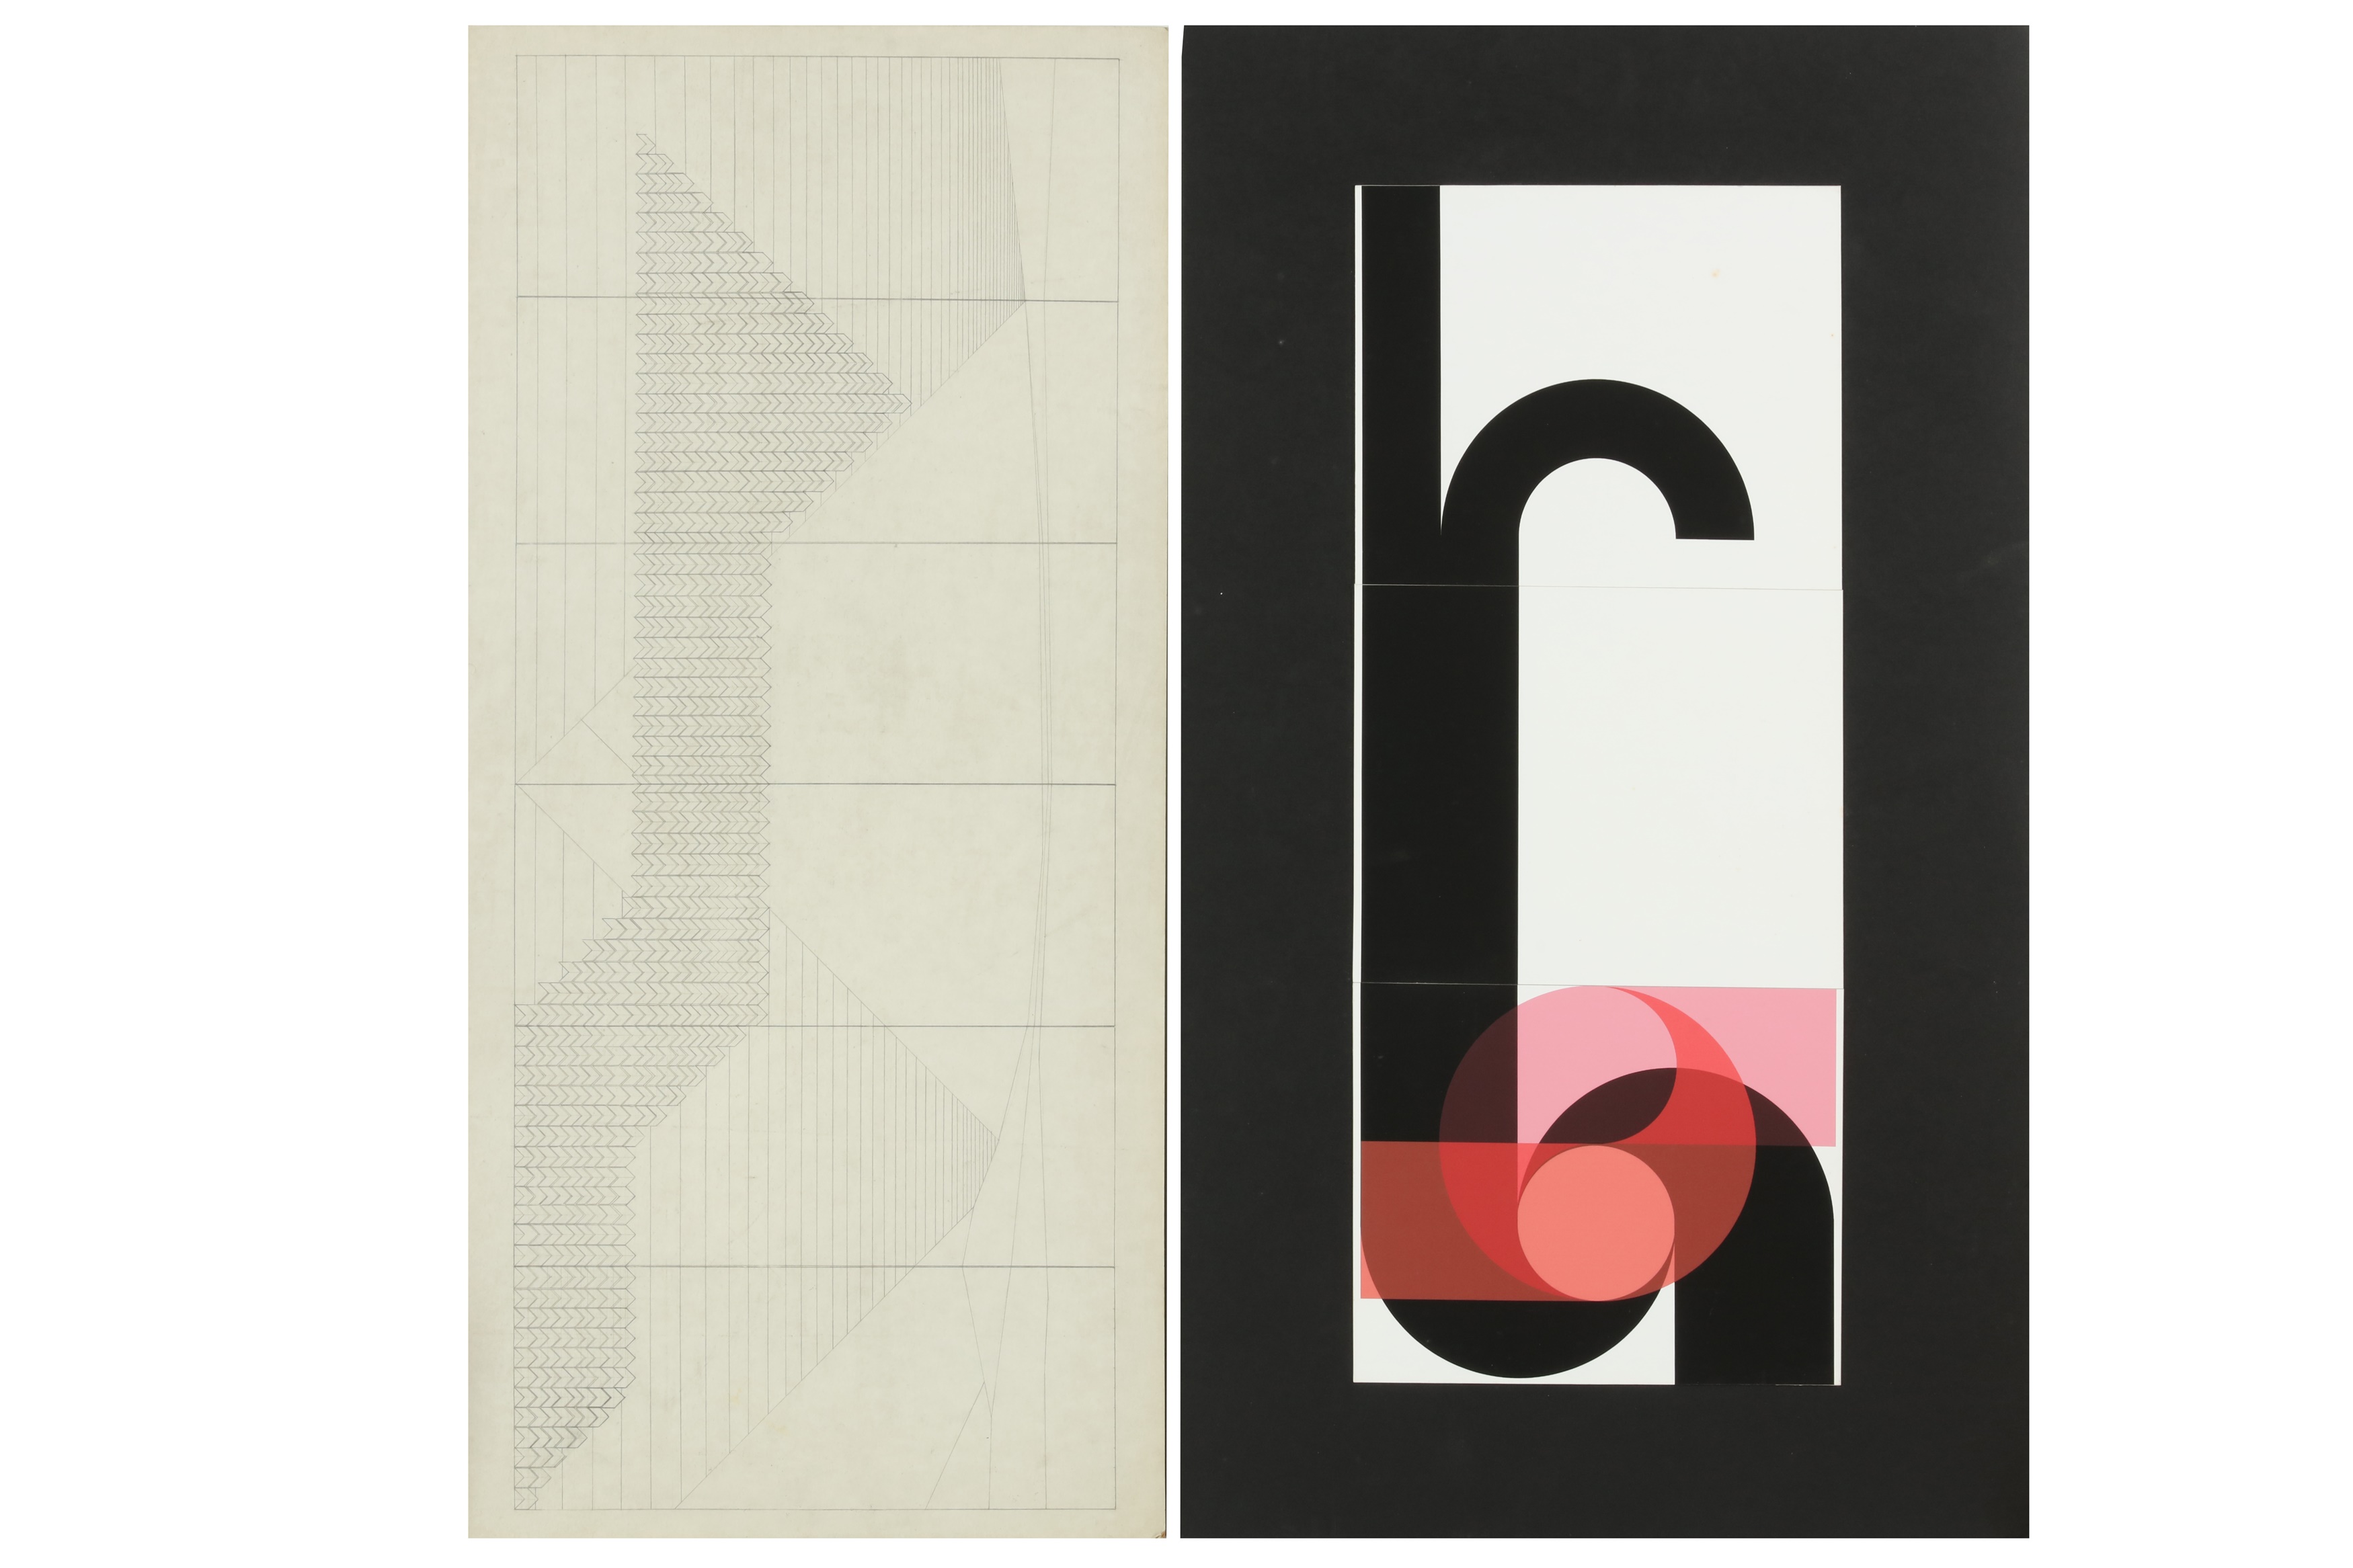 ABSTRACT GEOMETRIC DESIGNS MID 20TH CENTURY - Image 2 of 4